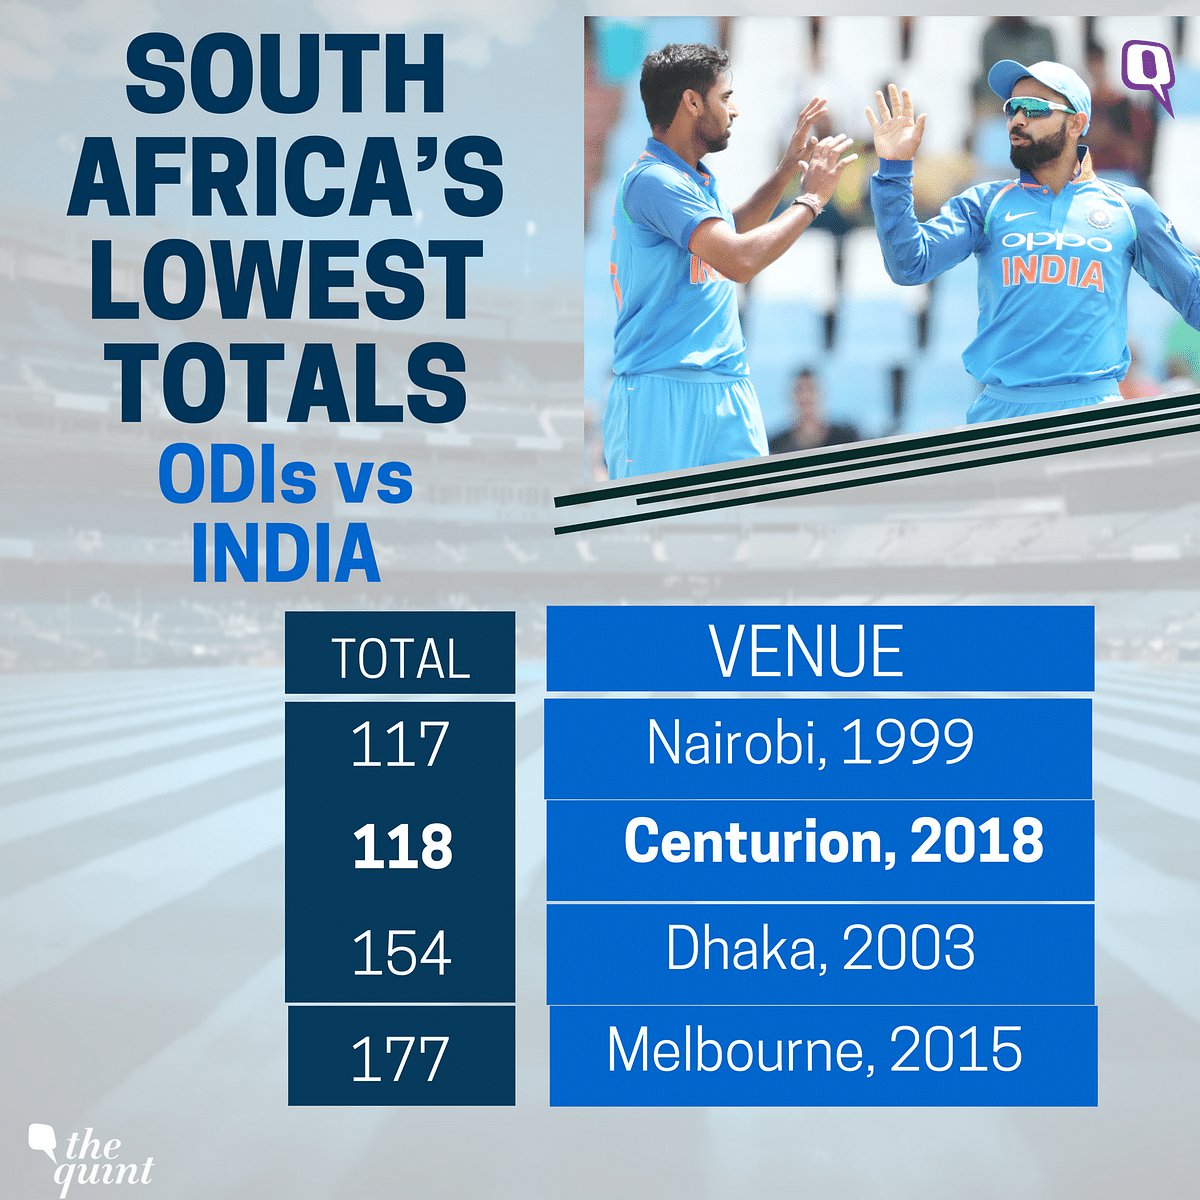 All the big stats from India’s second straight win against South Africa in the six-match ODI series.